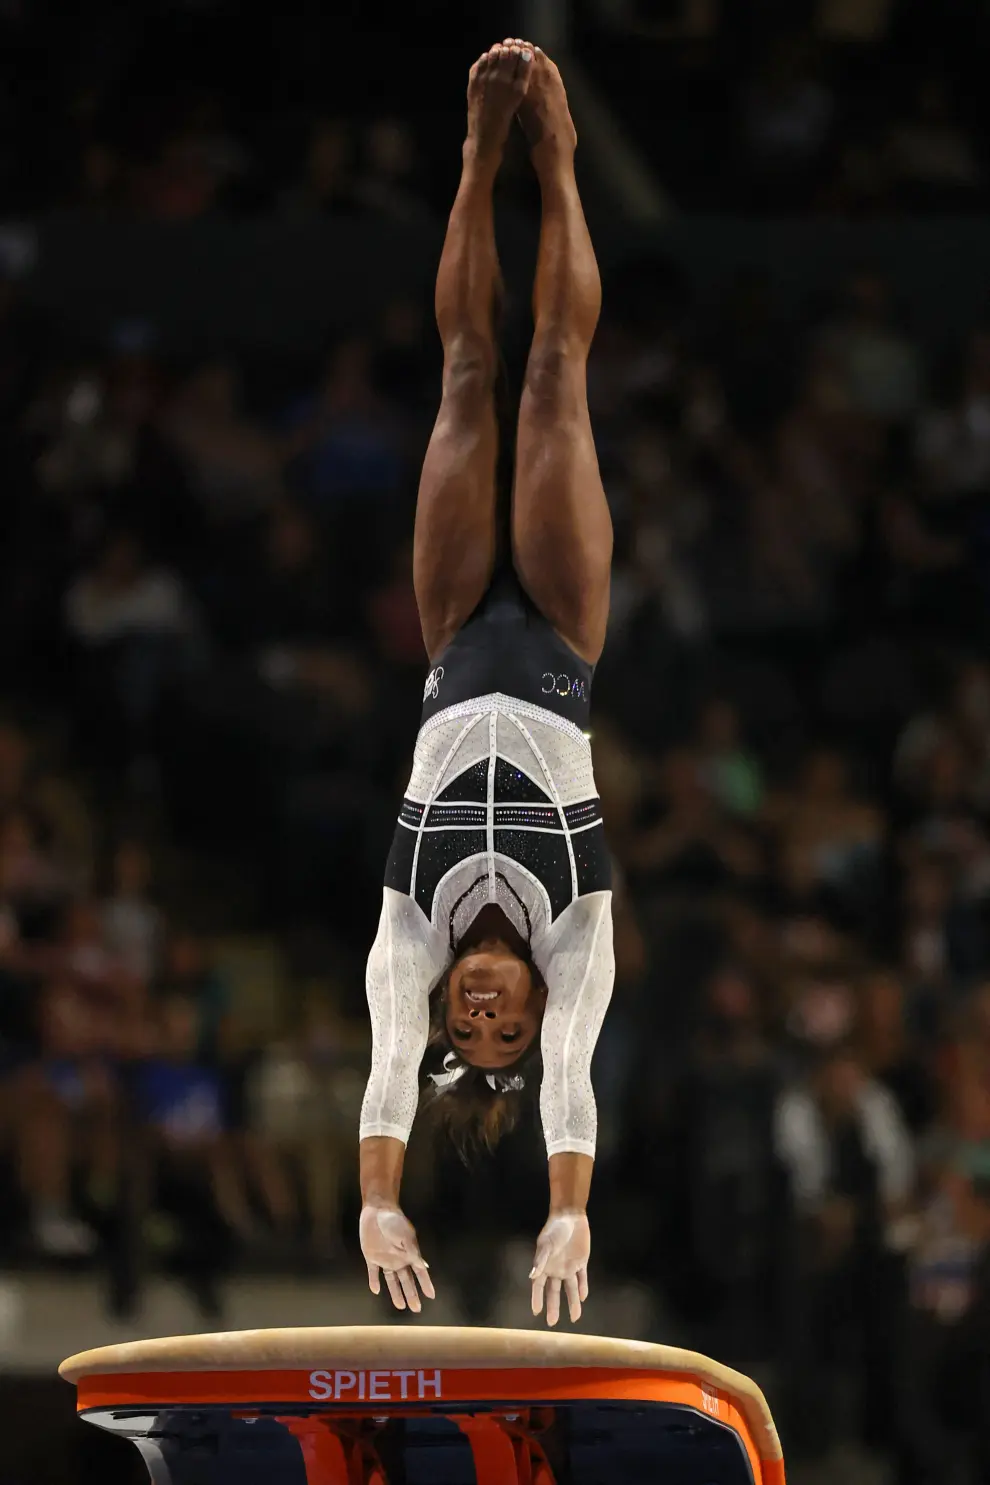 Aug 5, 2023; Hoffman Estates, Illinois, USA; Simone Biles reacts after her vault during the Core Hydration Classic at NOW Arena. Mandatory Credit: Jon Durr-USA TODAY Sports GYMNASTICS/